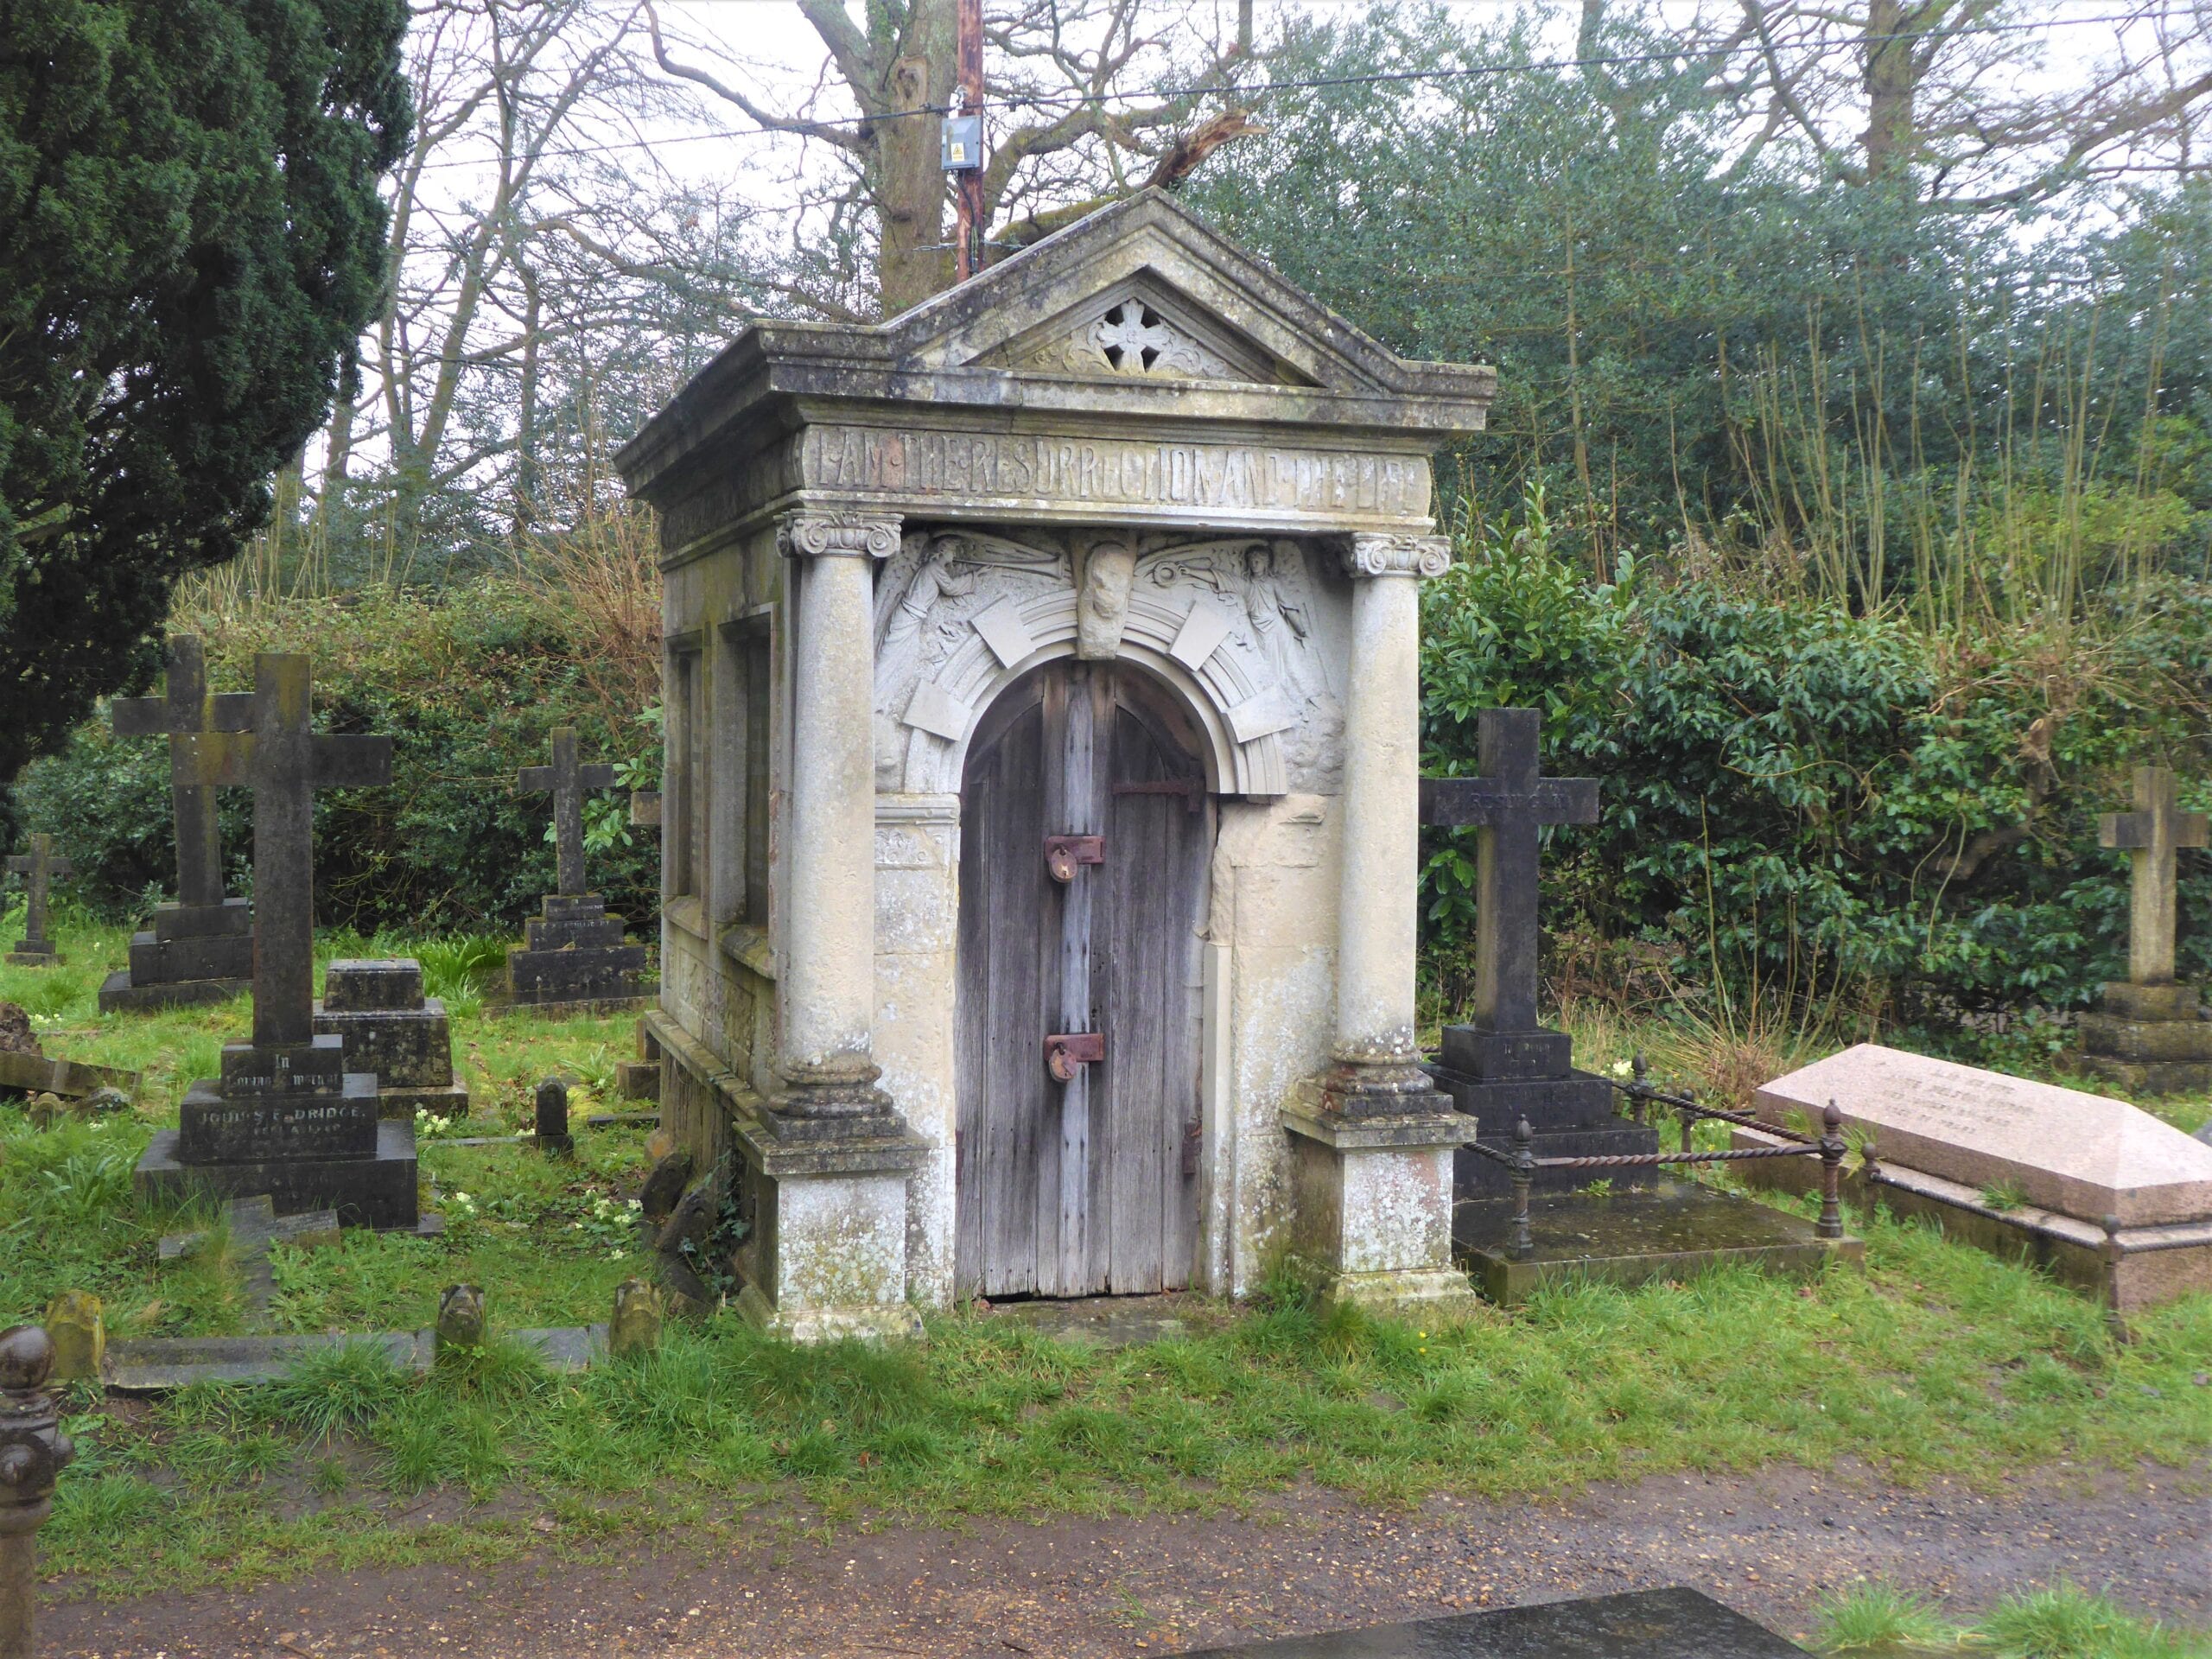 A photo of a mausoleum in the cemetery that was damaged during world war 2.